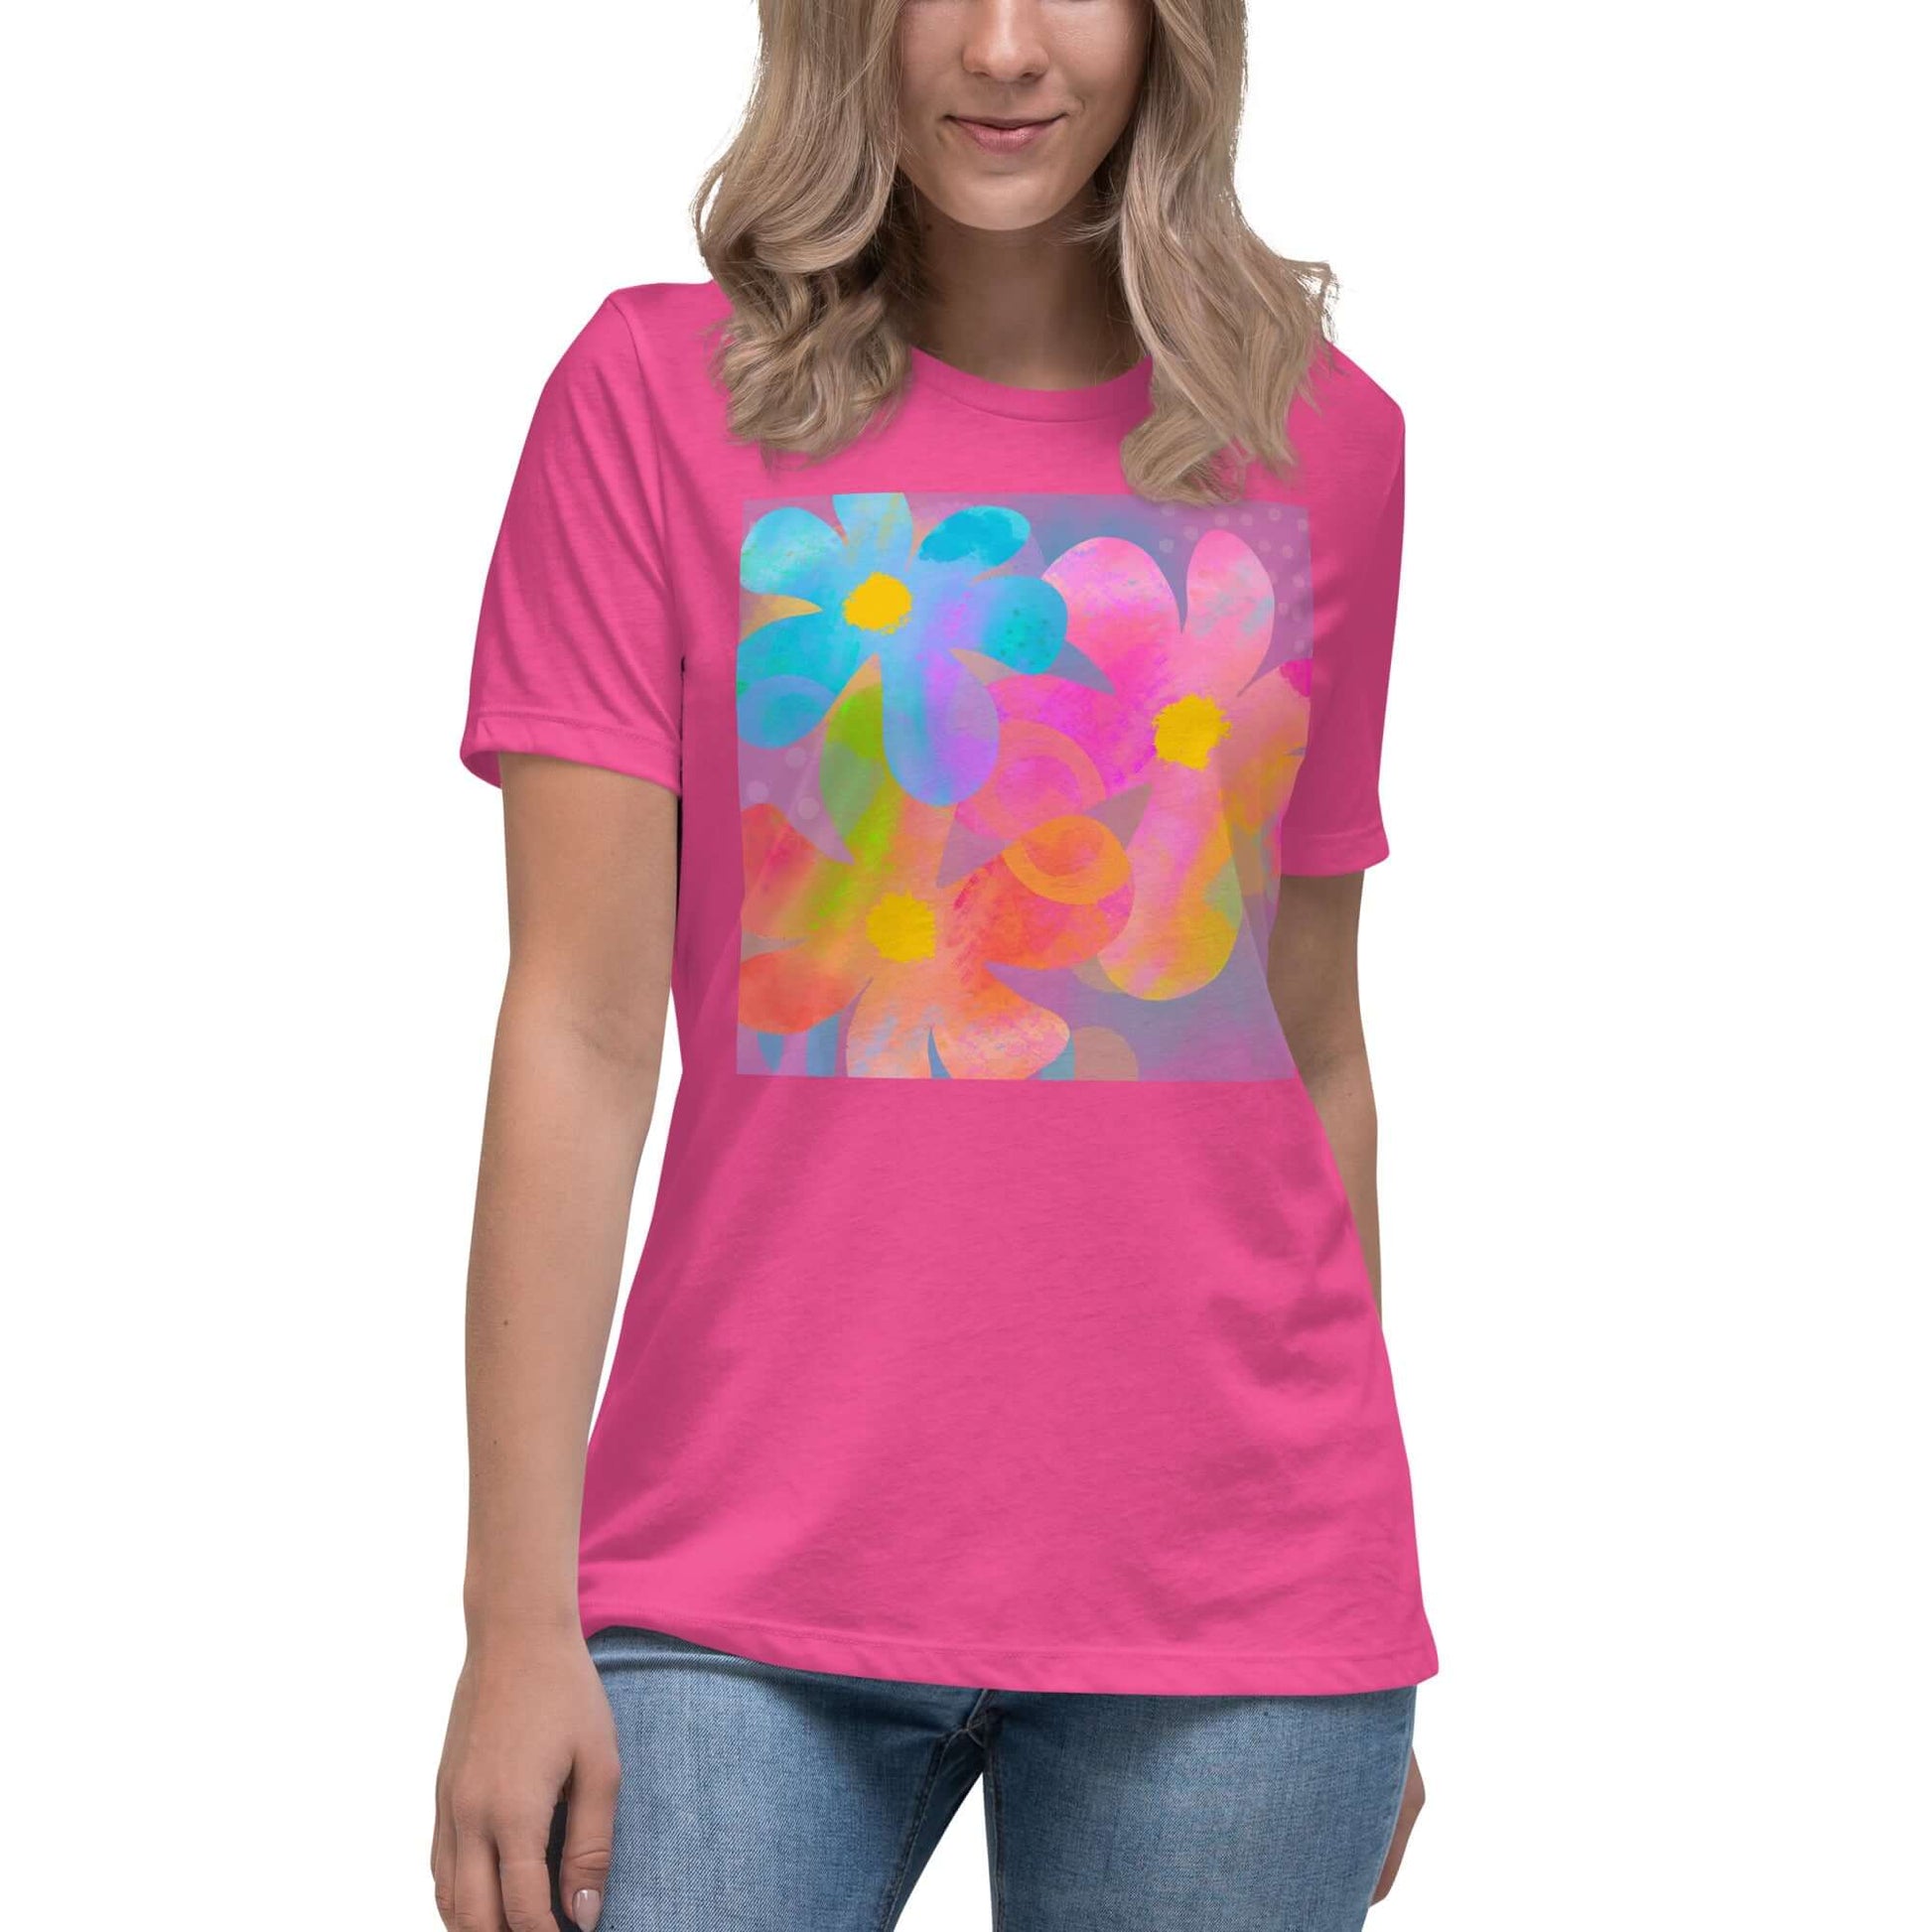 Big Colorful 1960s Psychedelic “Hippie Flowers” Women’s Short Sleeve Tee in Berry